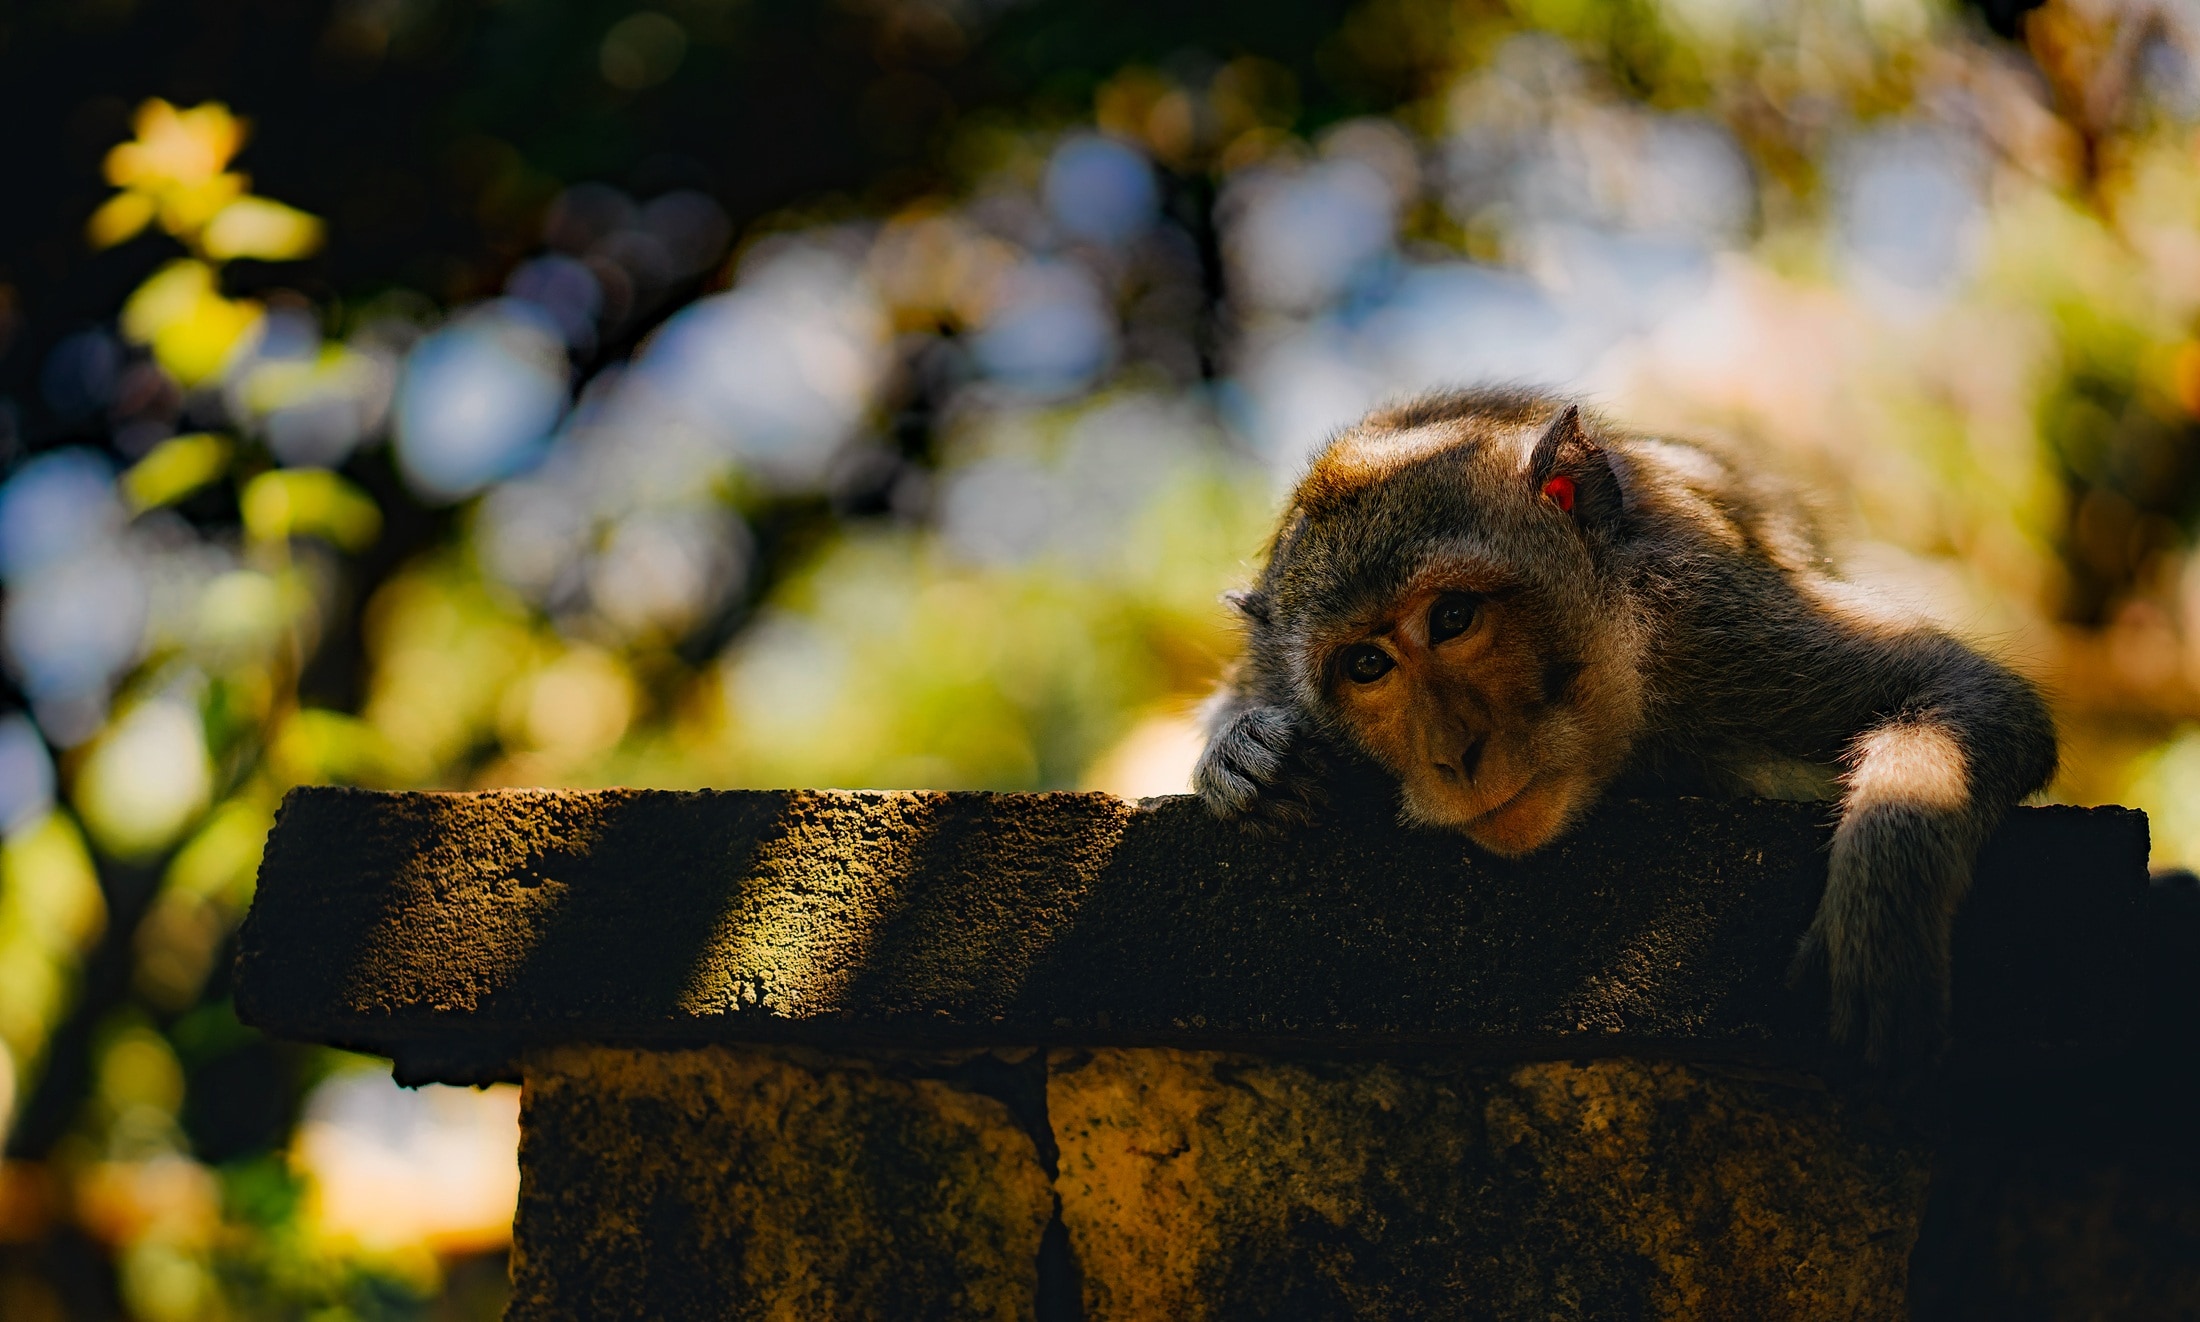 close up photo of grey monkey on grey concrete bench during daytime